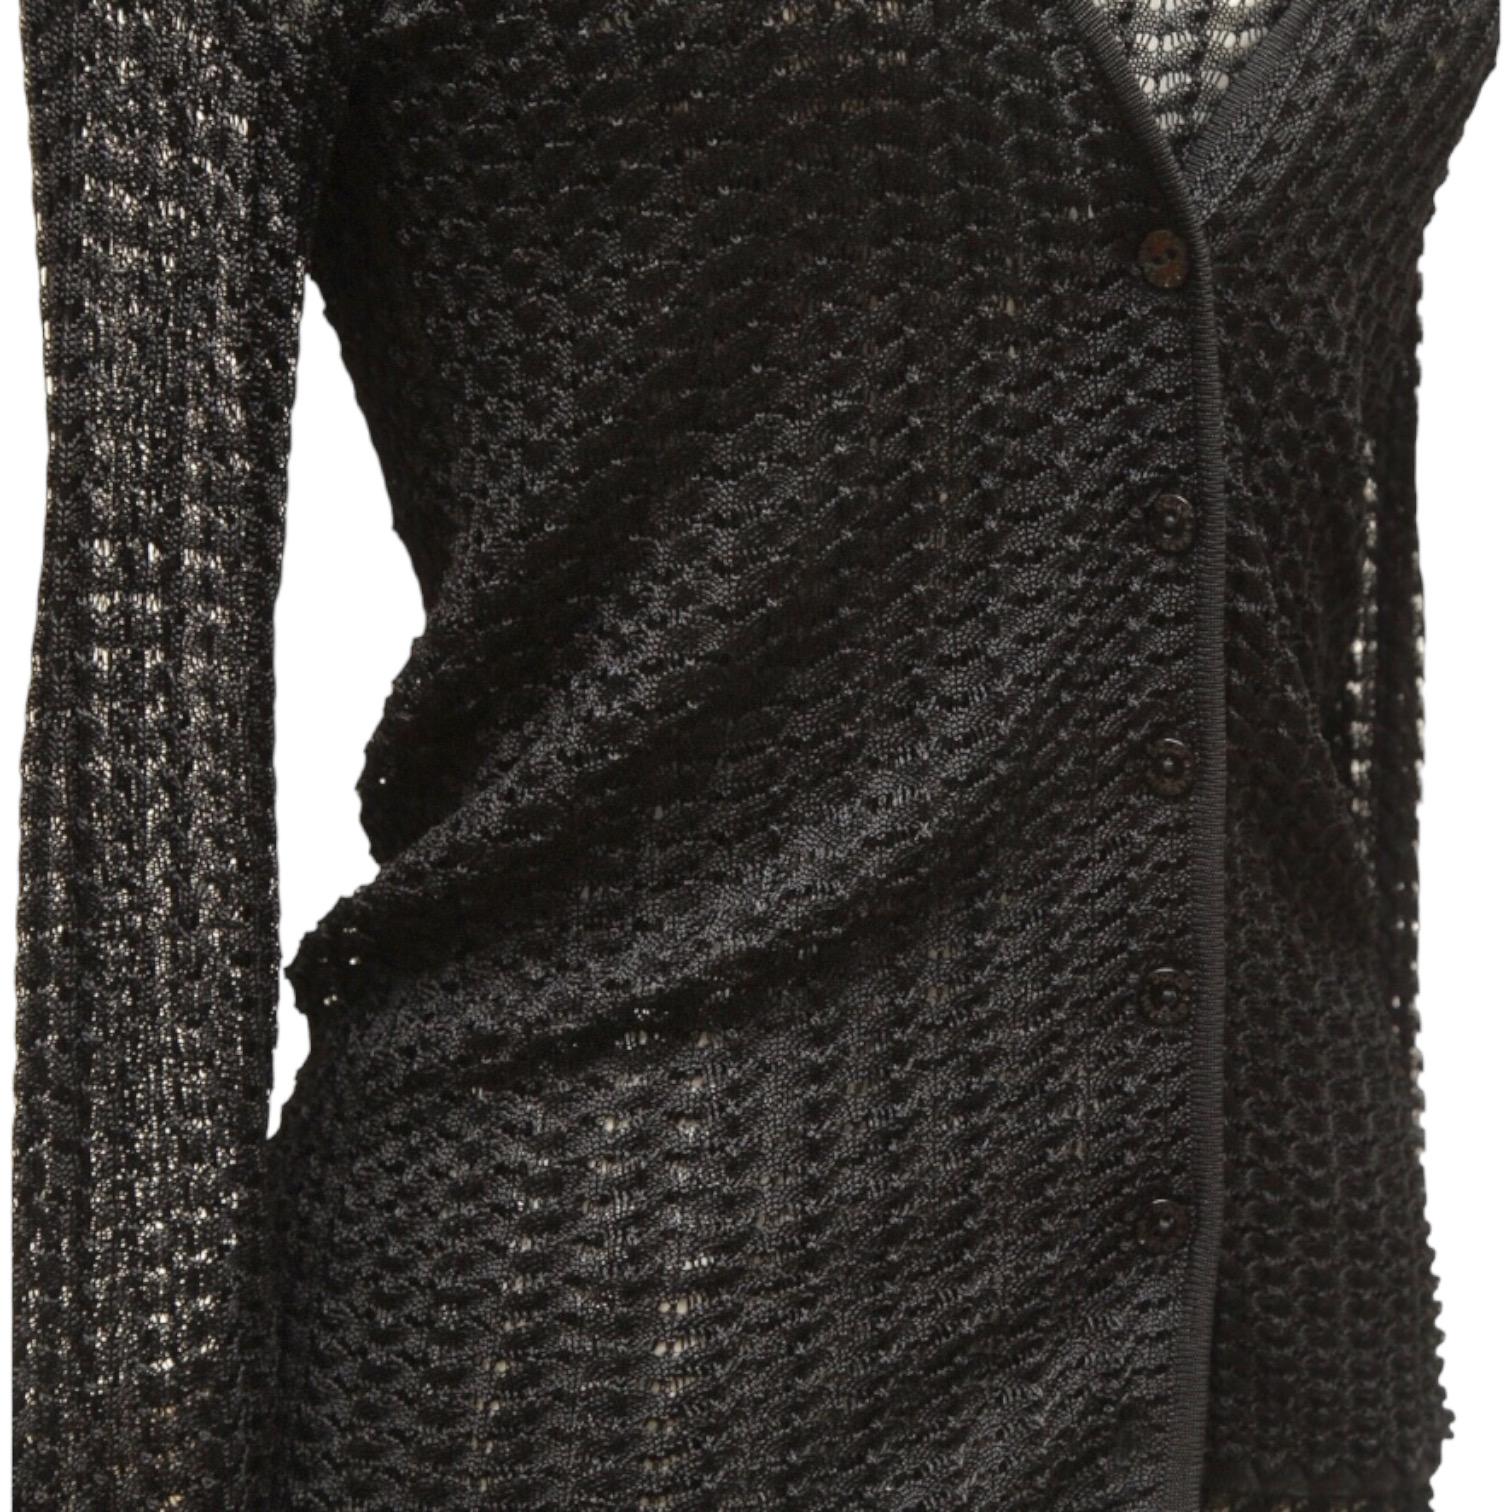 DOLCE & GABBANA Black Sweater Cardigan Knit 2pc Shell Sleeveless Twinset 38 40 In Excellent Condition For Sale In Hollywood, FL